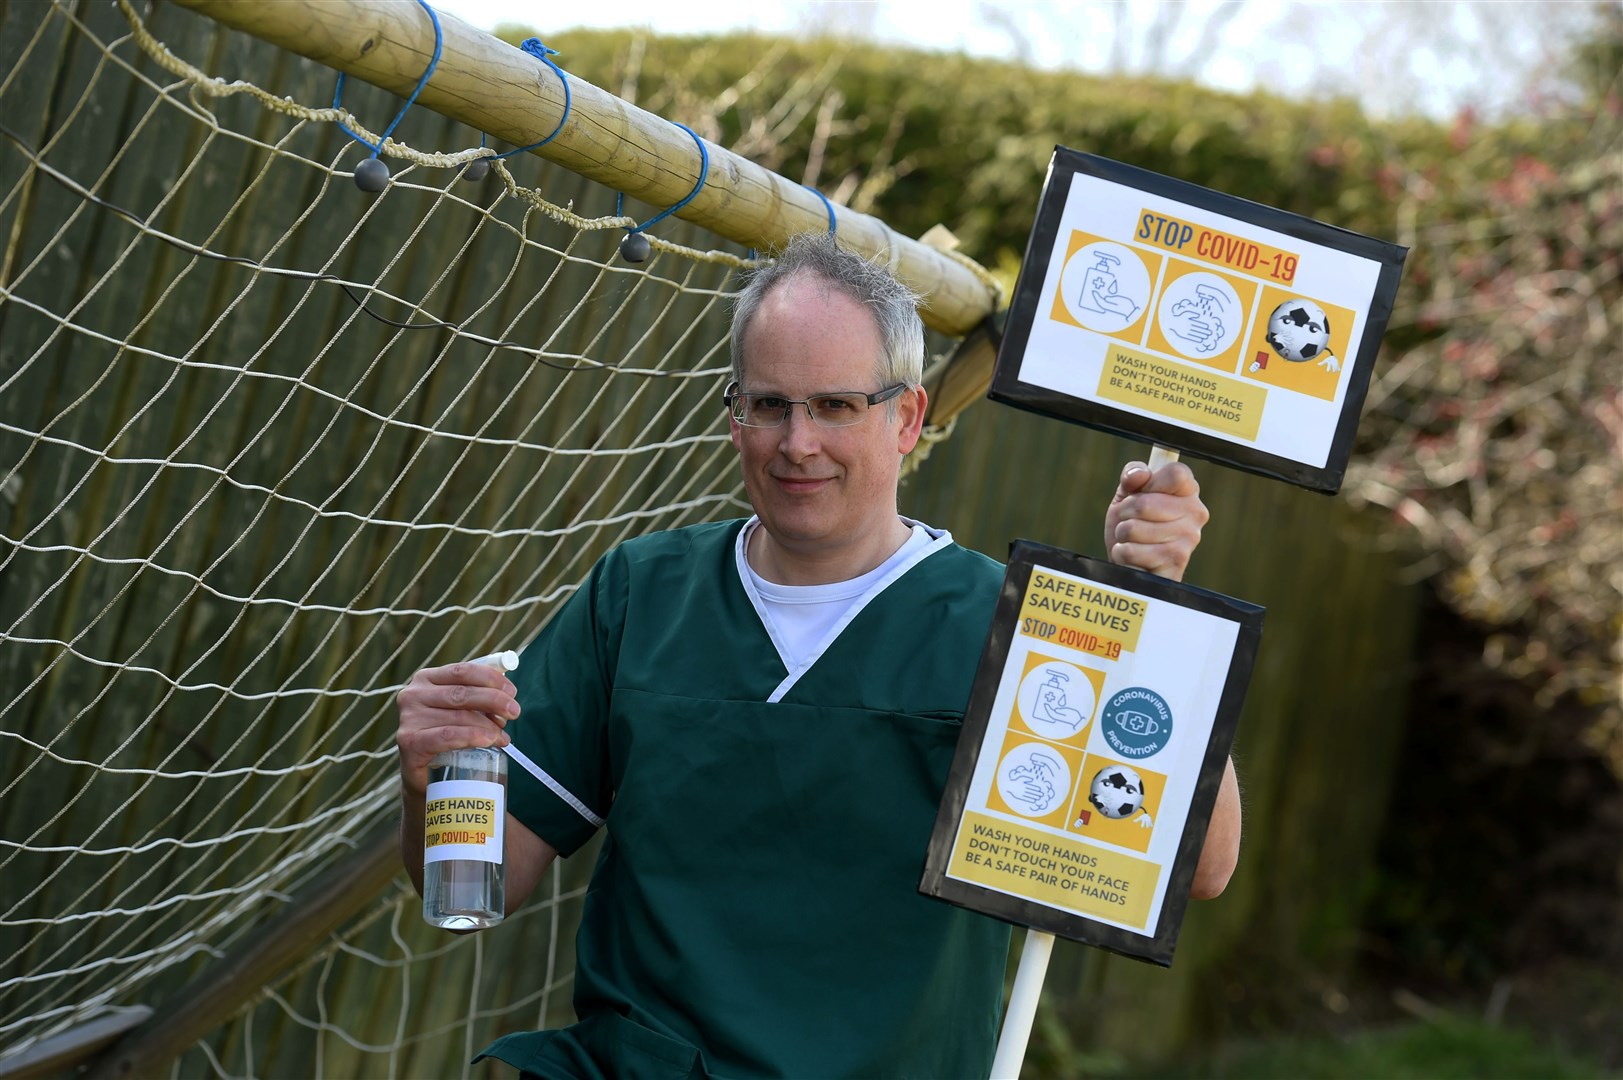 GP Dr Ross Jaffrey launched the Safe hands campaign at the start of the first lockdown. Picture: Callum Mackay